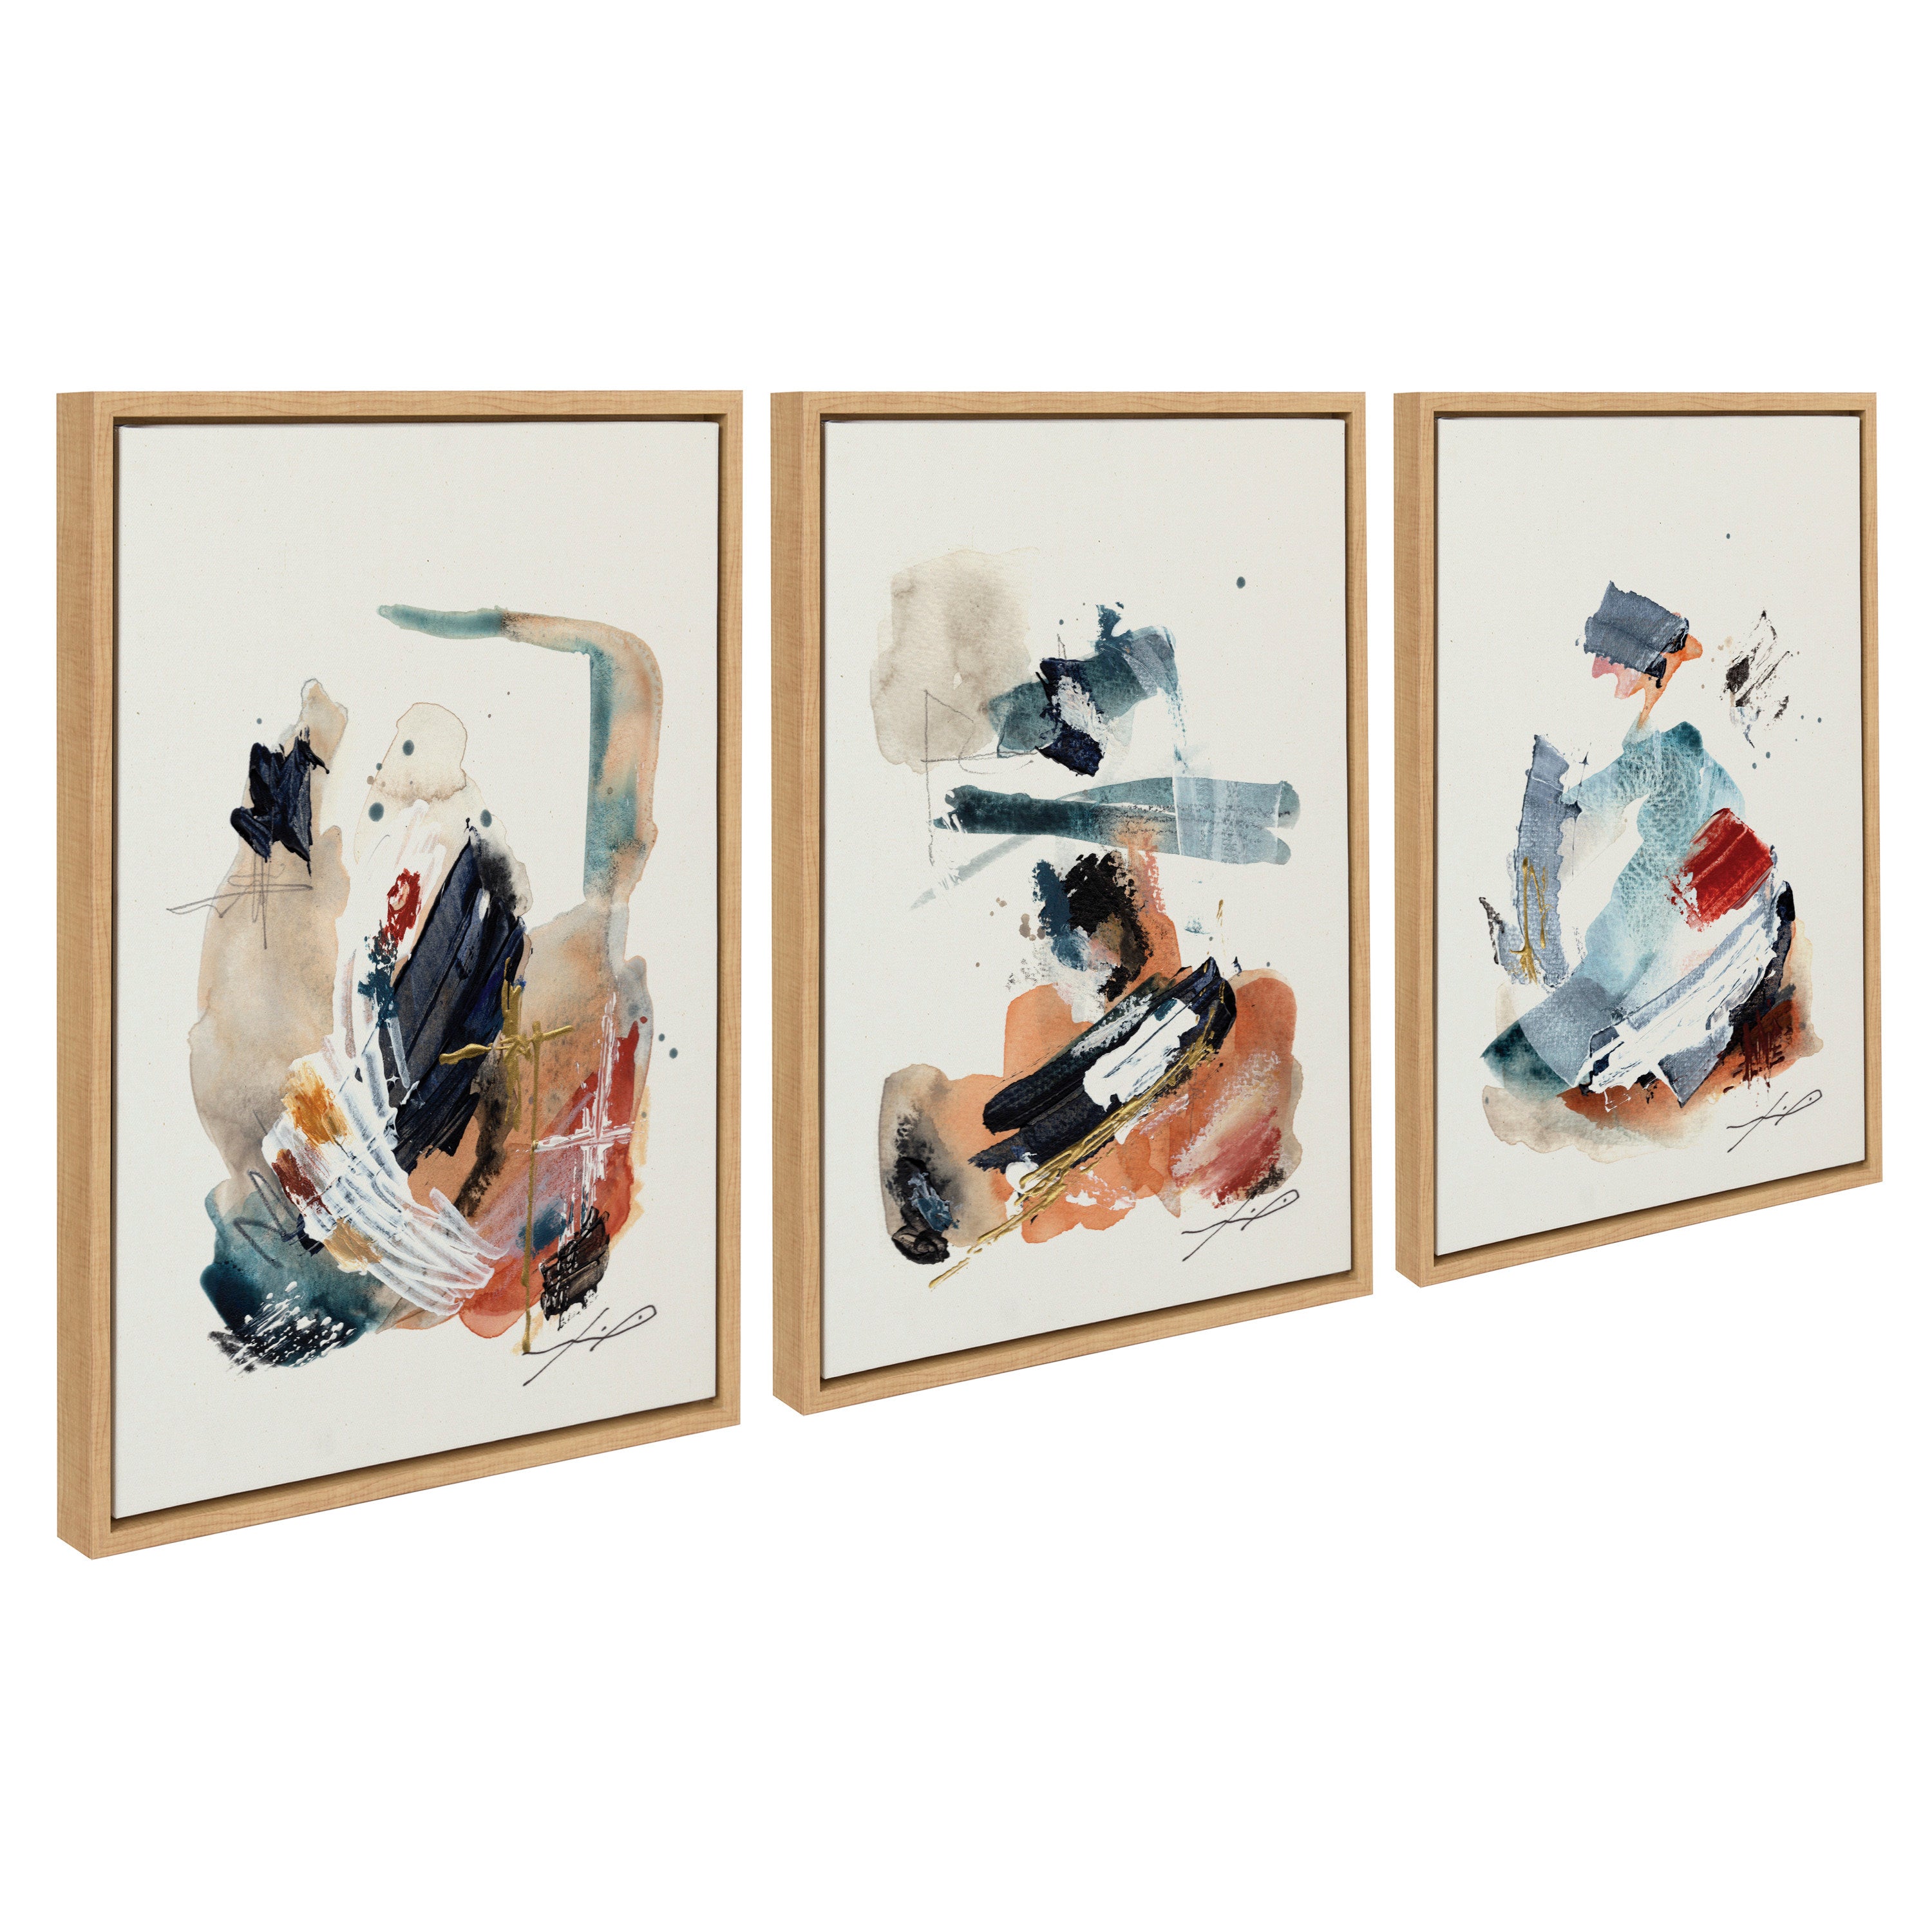 Sylvie By The Fireplace Series Framed Canvas Art Set by Xizhou Xie